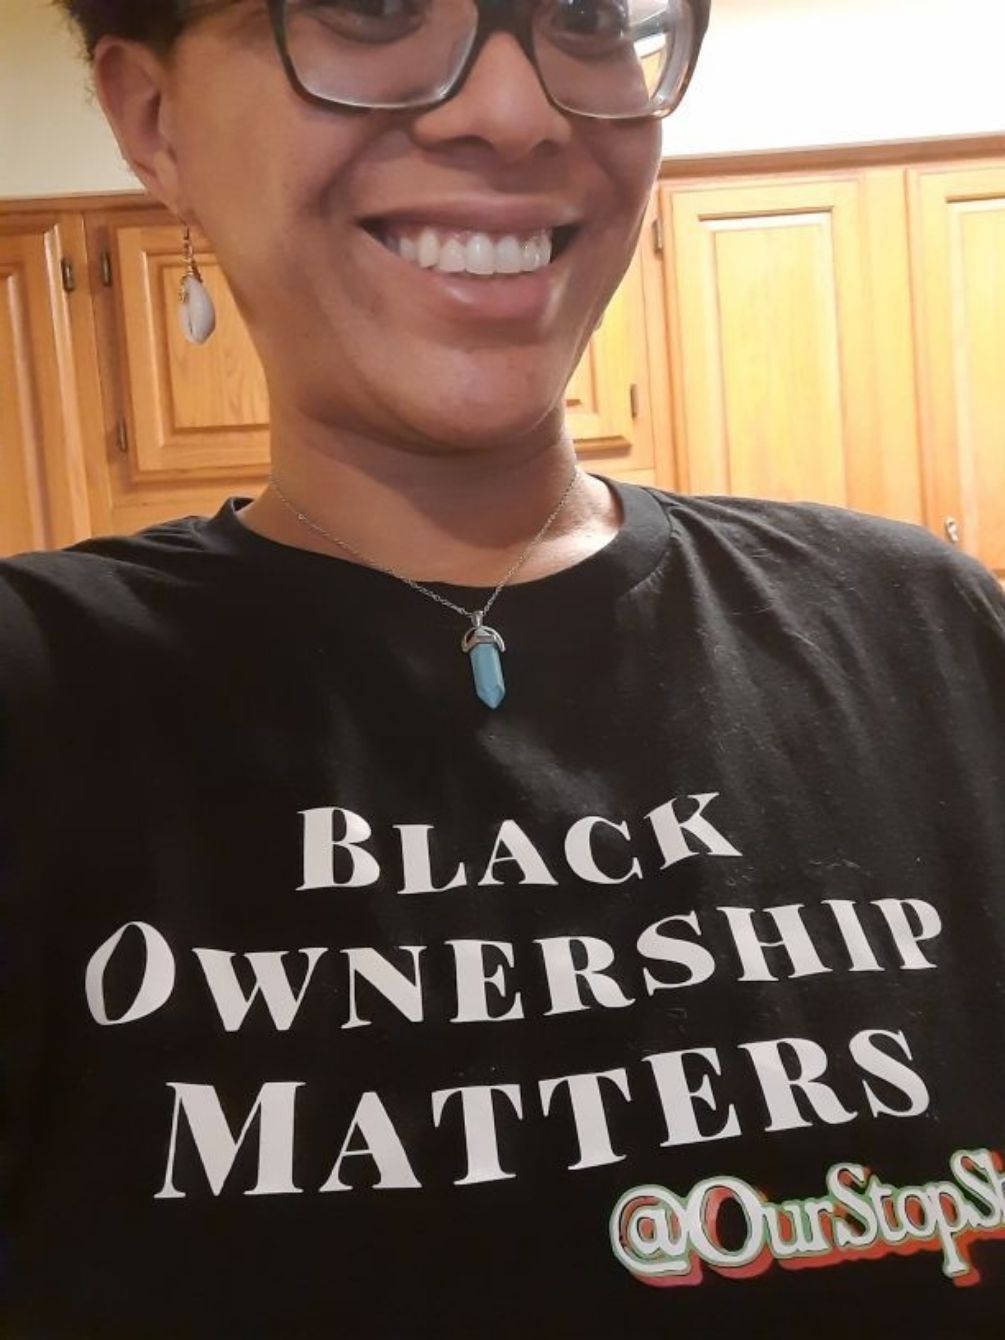 About the Black Ownership campaign on Bonfire 5